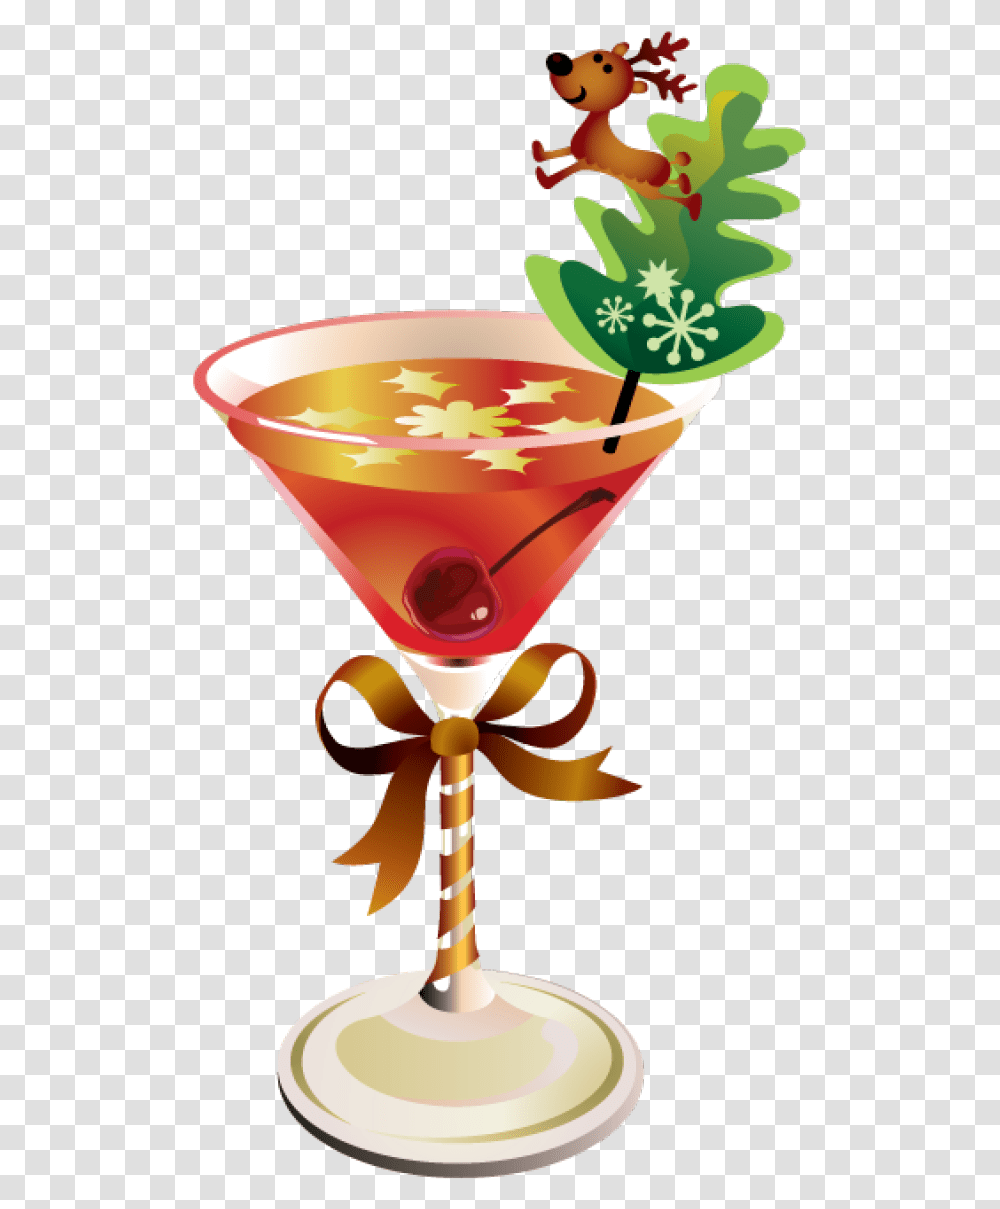 Cocktail Svg Free Download Files Clipart Christmas Drink, Alcohol, Beverage, Martini, Lamp Transparent Png